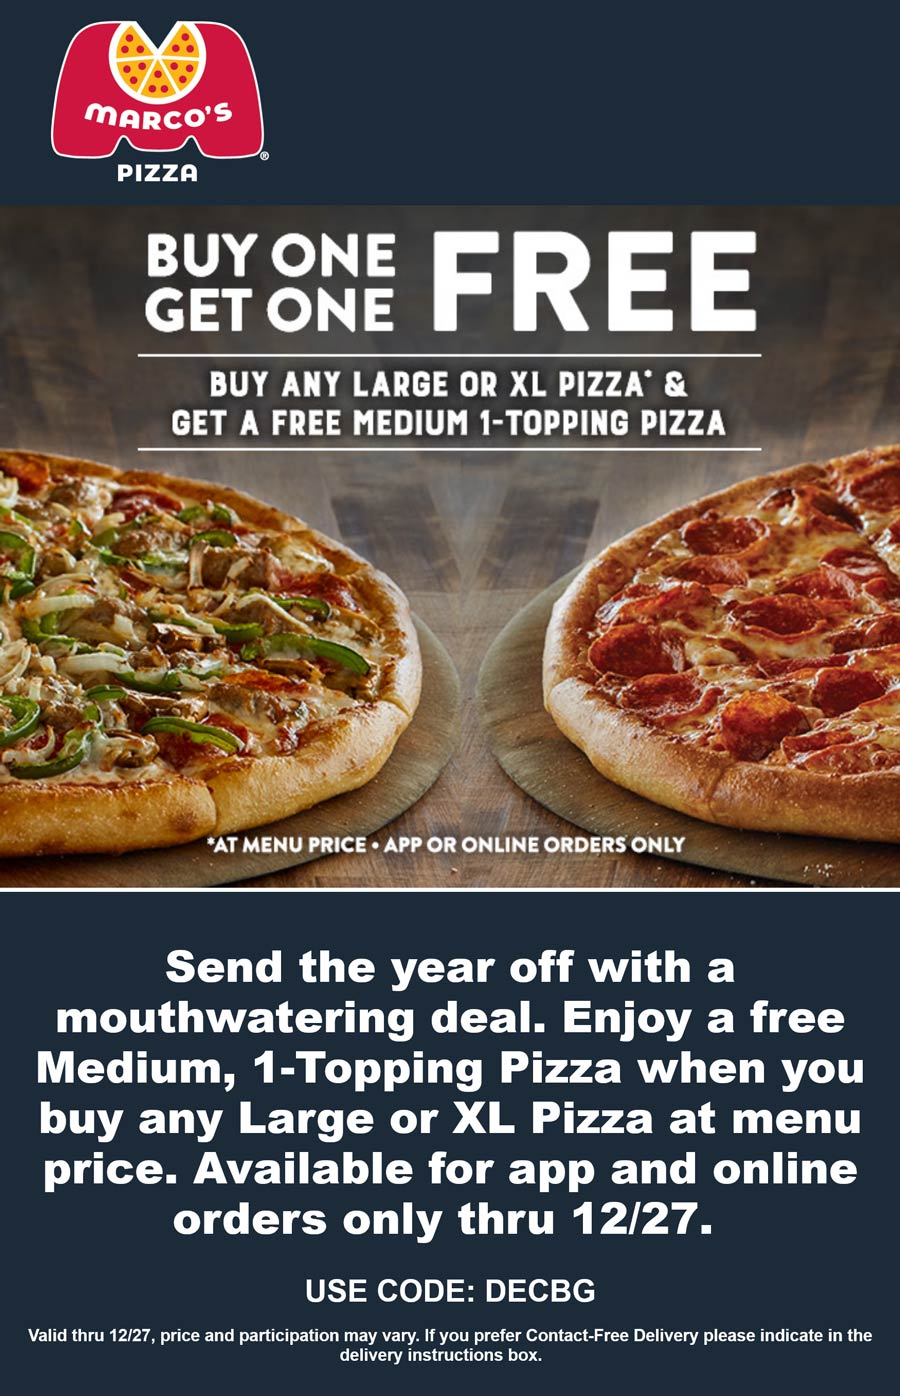 Marcos restaurants Coupon  Second pizza free at Marcos pizza via promo code DECBG #marcos 